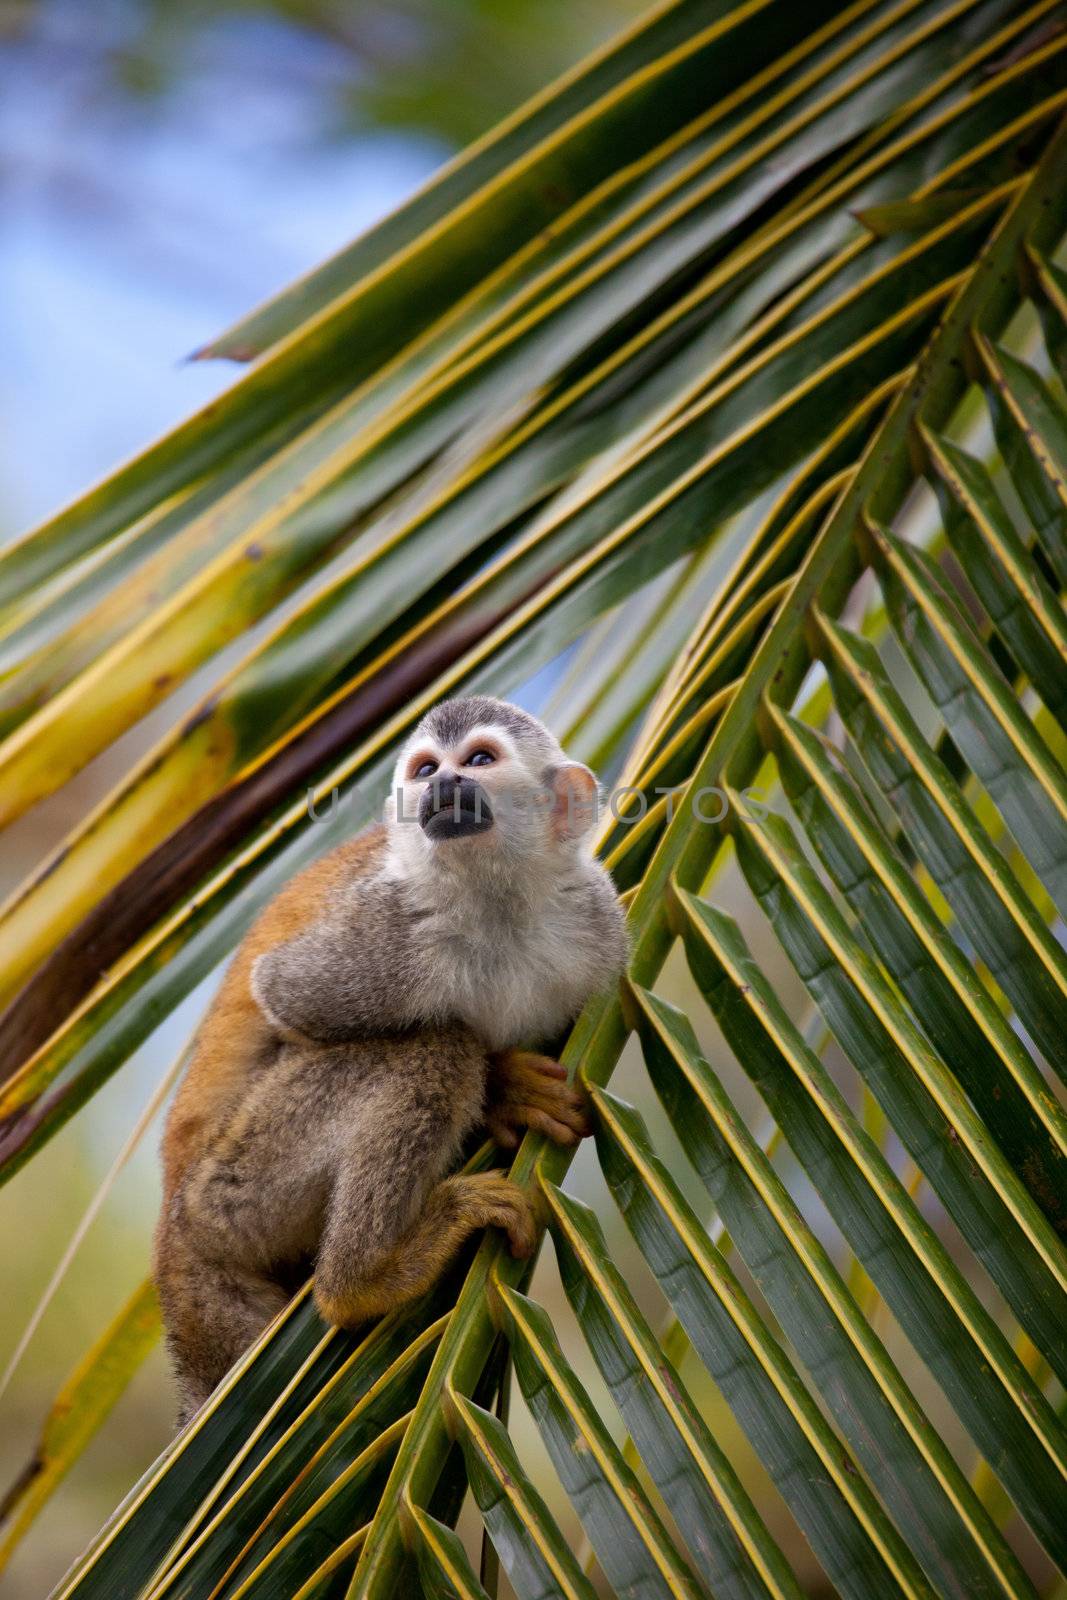 Squirrel monkey on the leave of a palm tee looking up